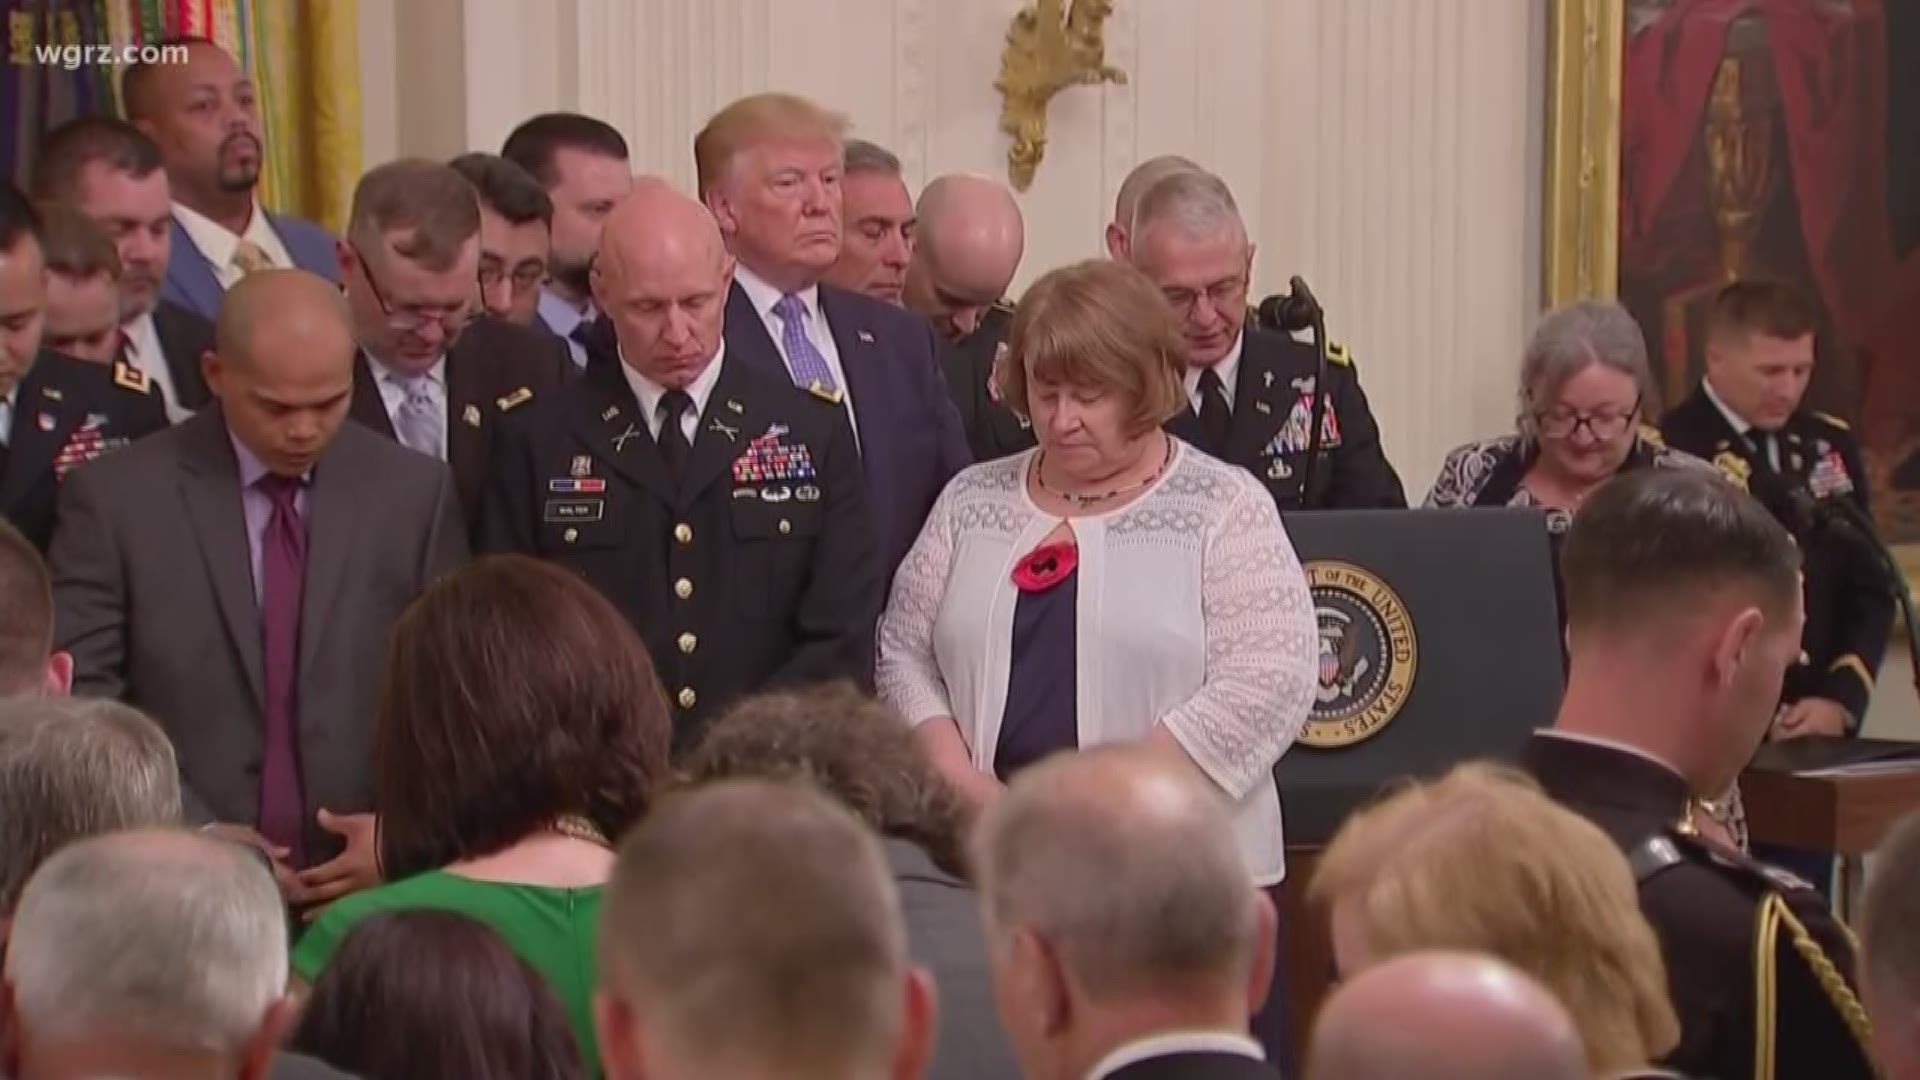 Former Army Staff Sgt. David Bellavia received the Medal of Honor in Washington on June 25.